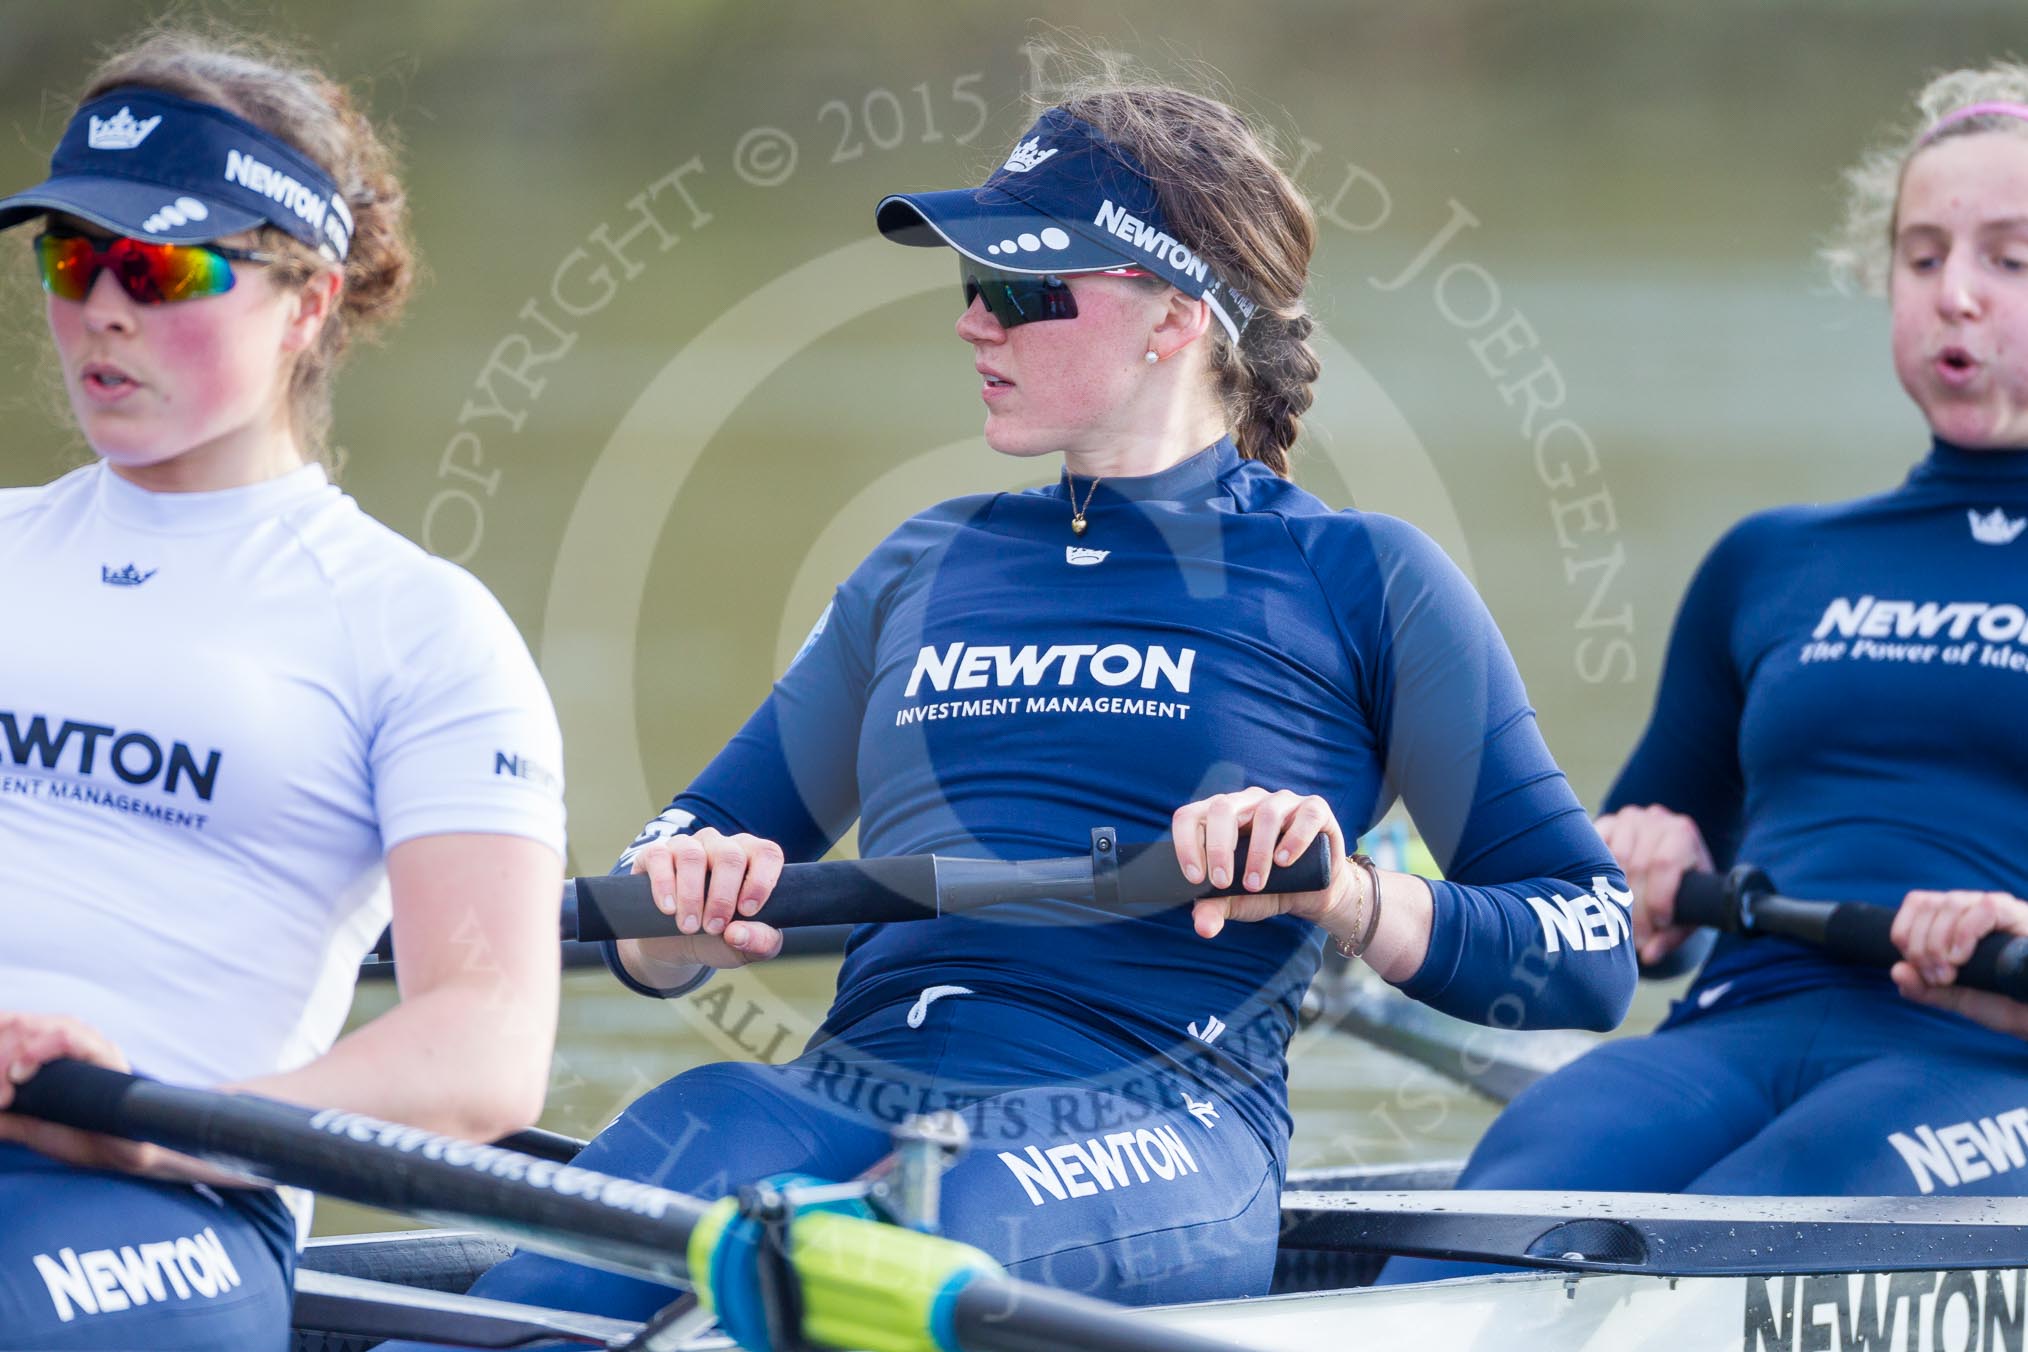 The Boat Race season 2015: OUWBC training Wallingford.

Wallingford,

United Kingdom,
on 04 March 2015 at 15:46, image #73